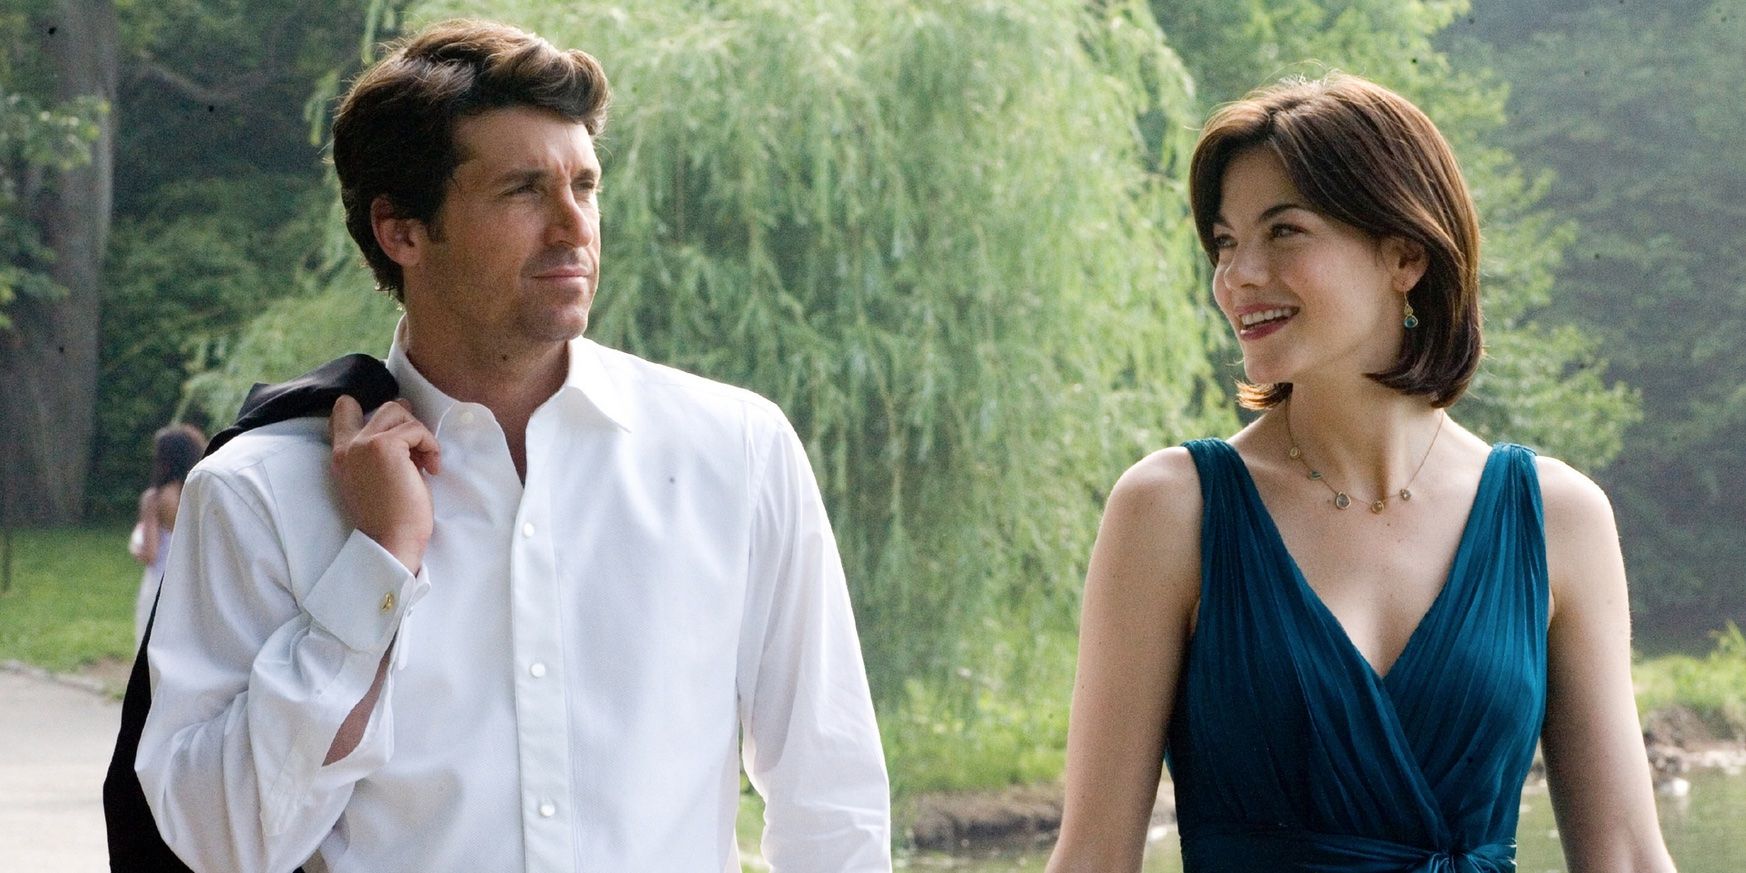 Patrick Dempsey and Michelle Monaghan in 'Made of Honor'